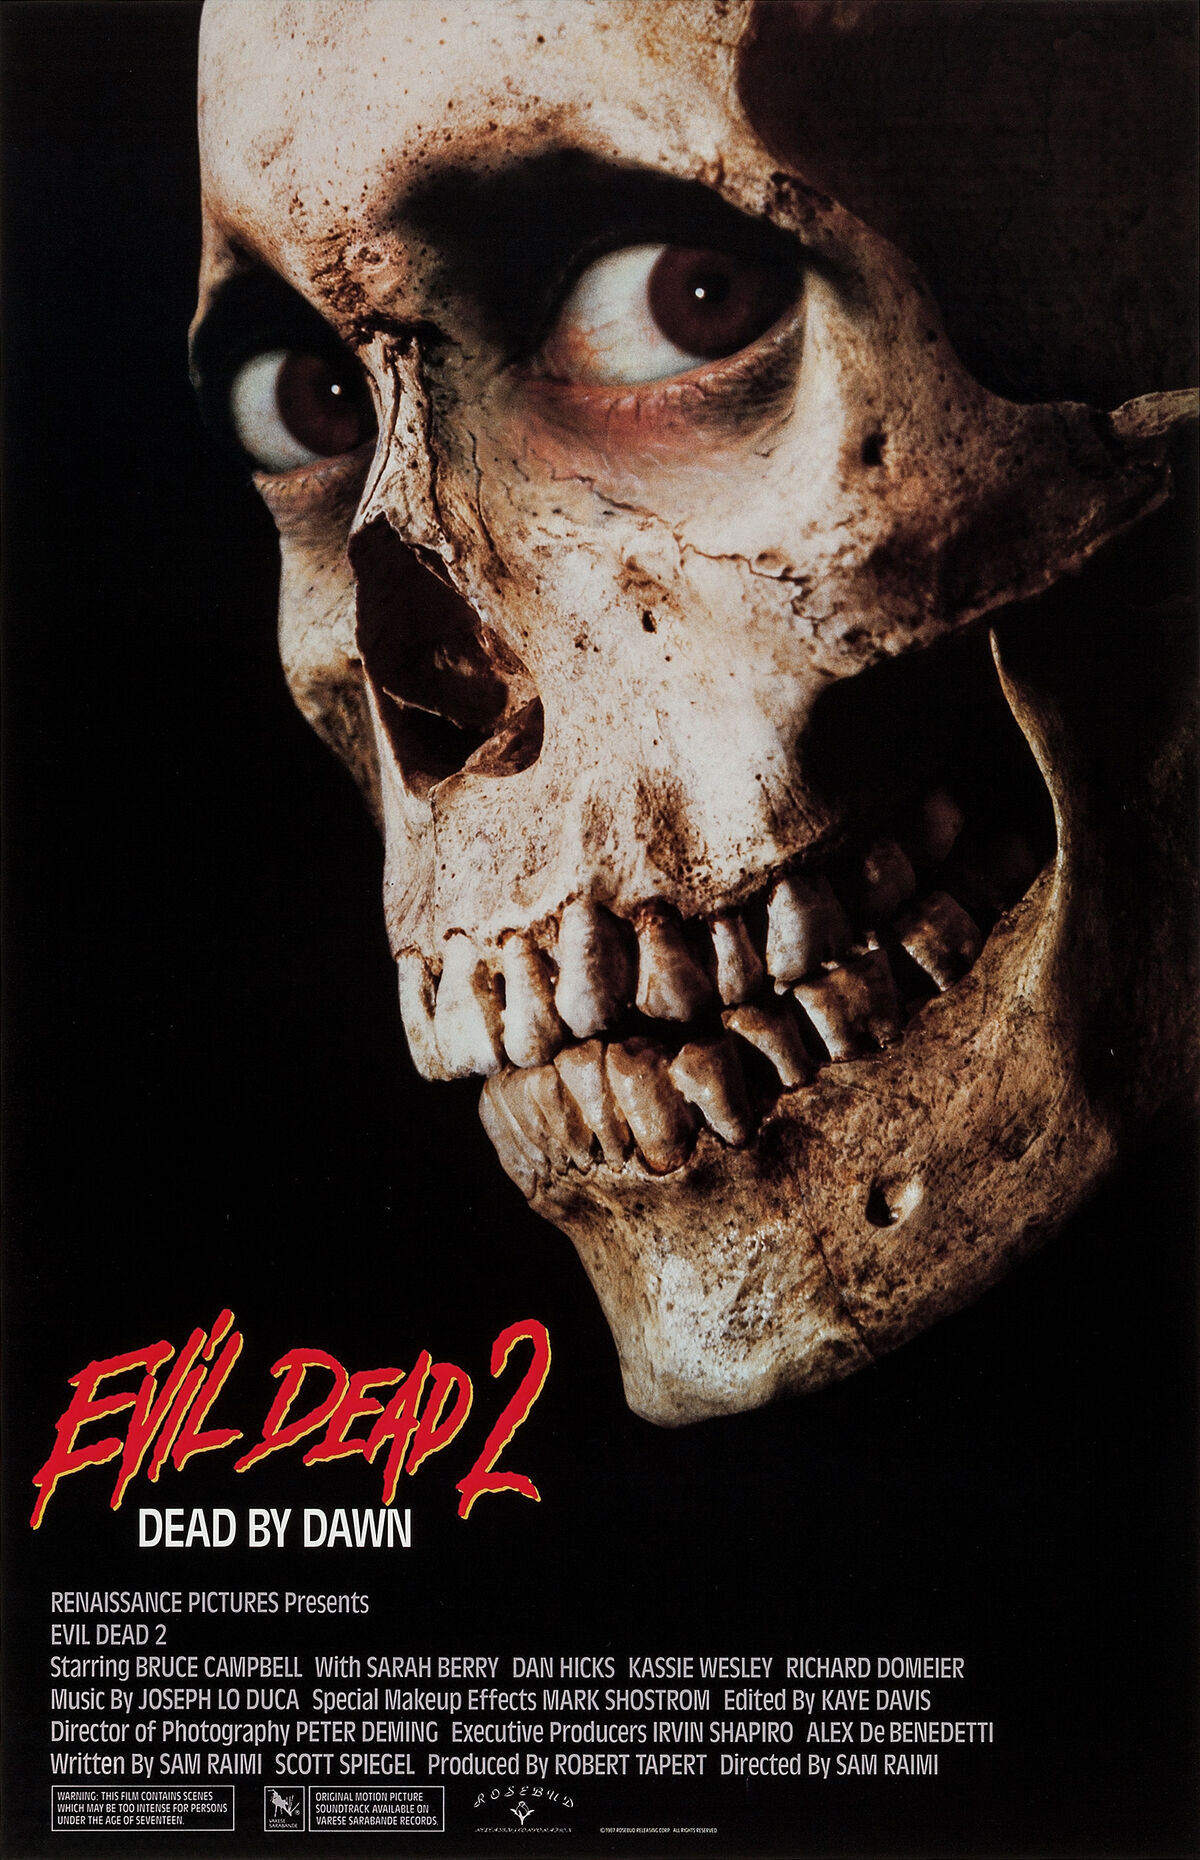 Evil Dead The Game Guides Wiki page: 1